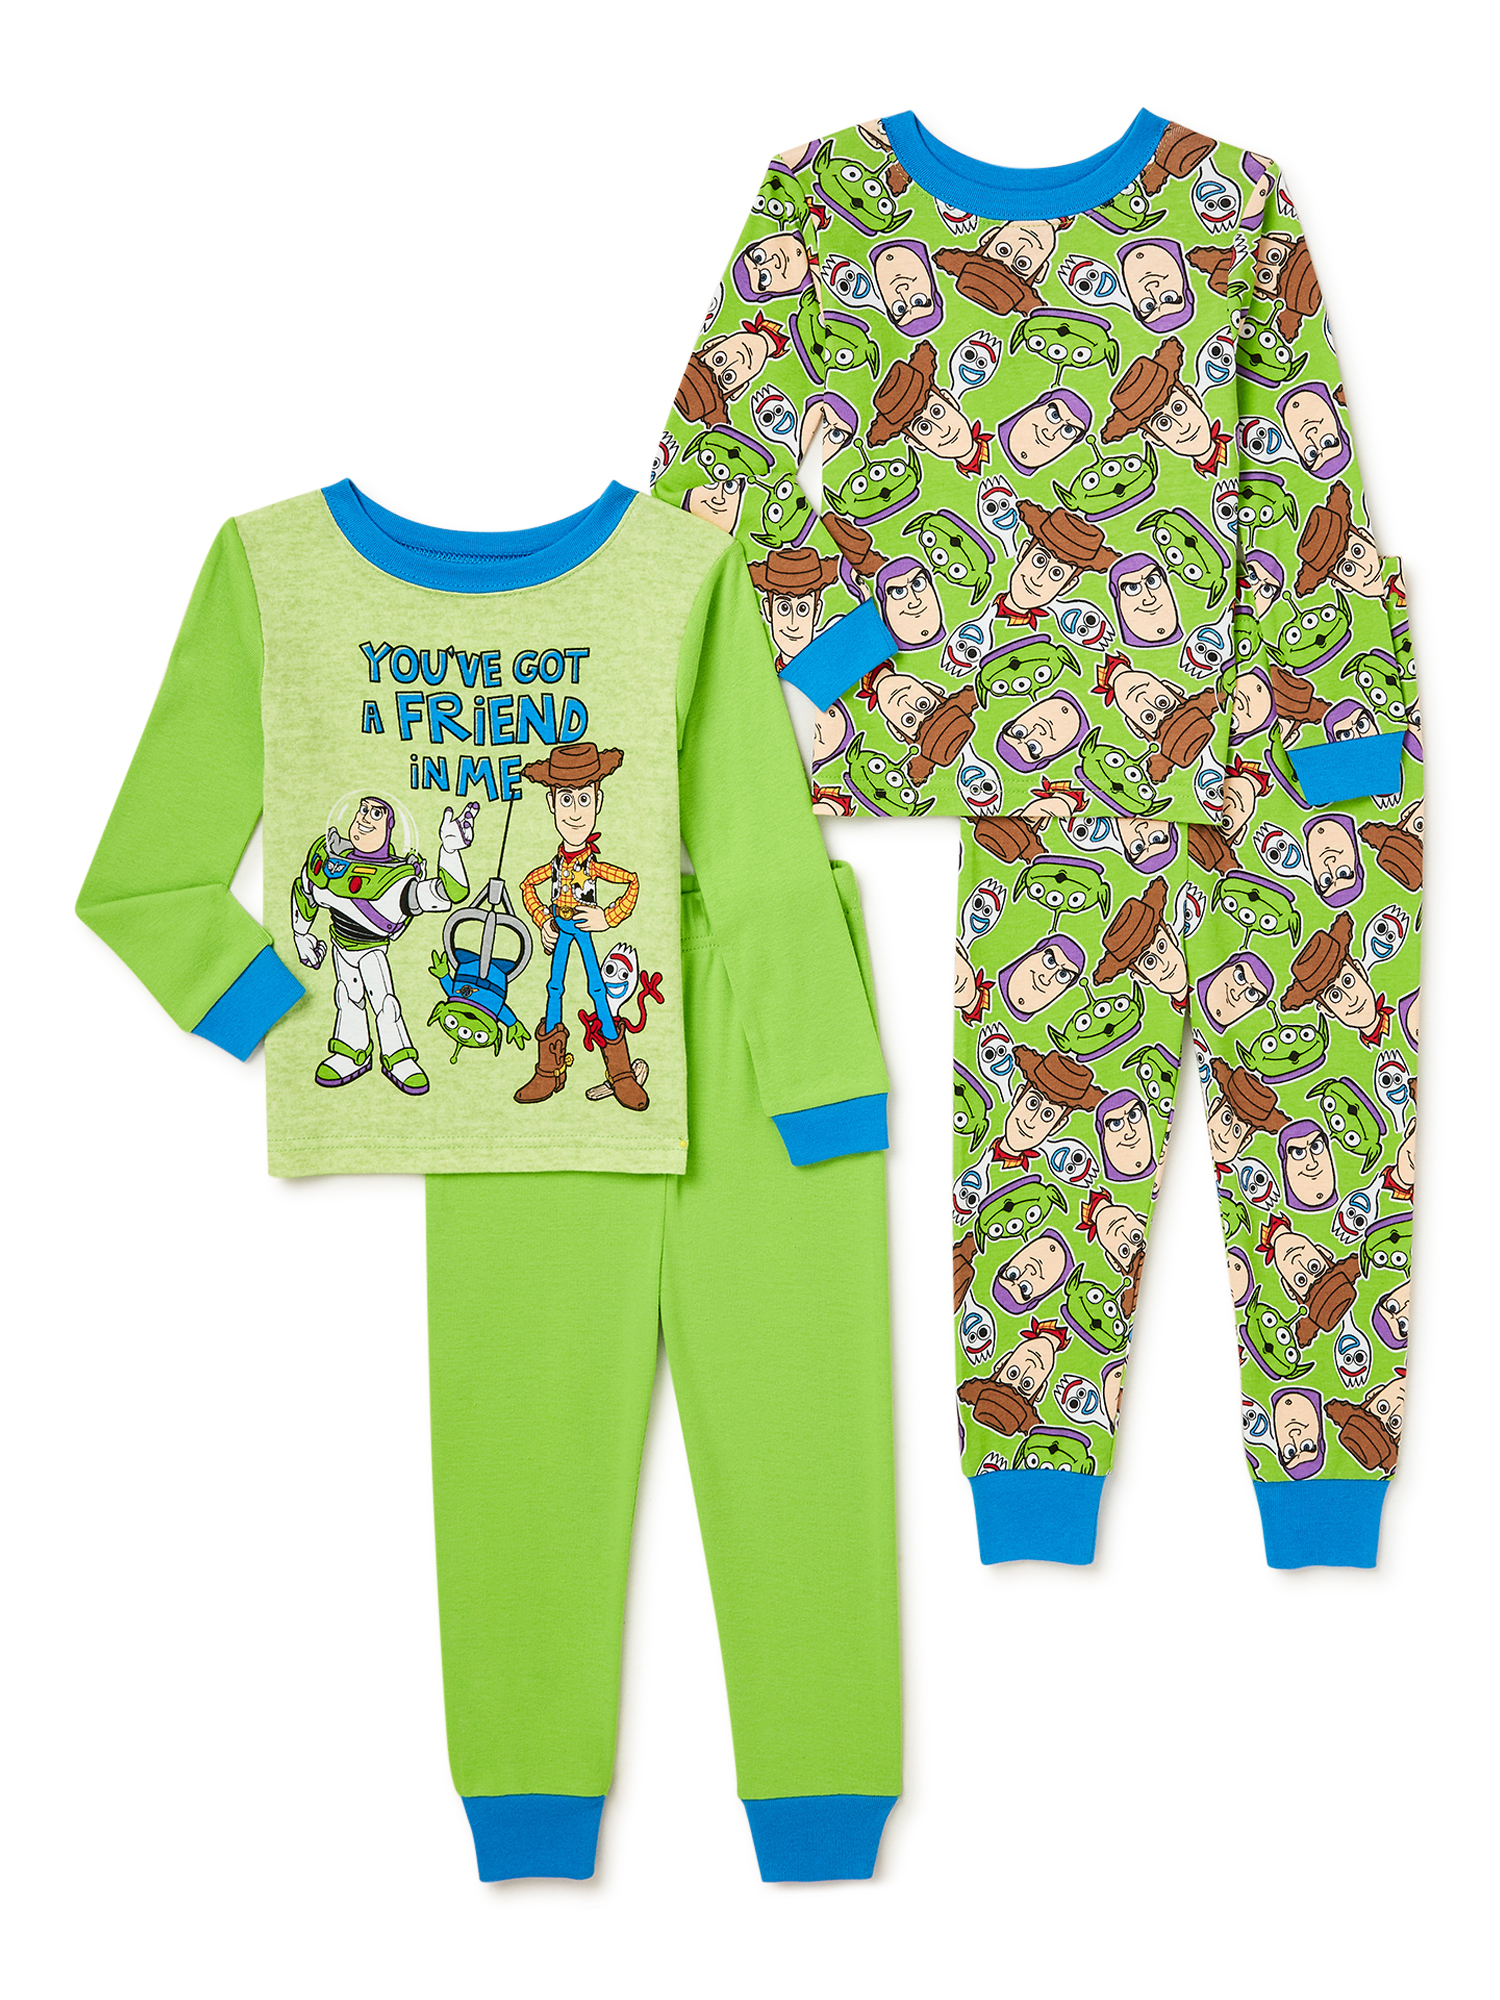 Toy Story 4 Exclusive Toddler Boys Cotton Pajama Set, 4-Piece, Sizes 2T-5T - image 1 of 3